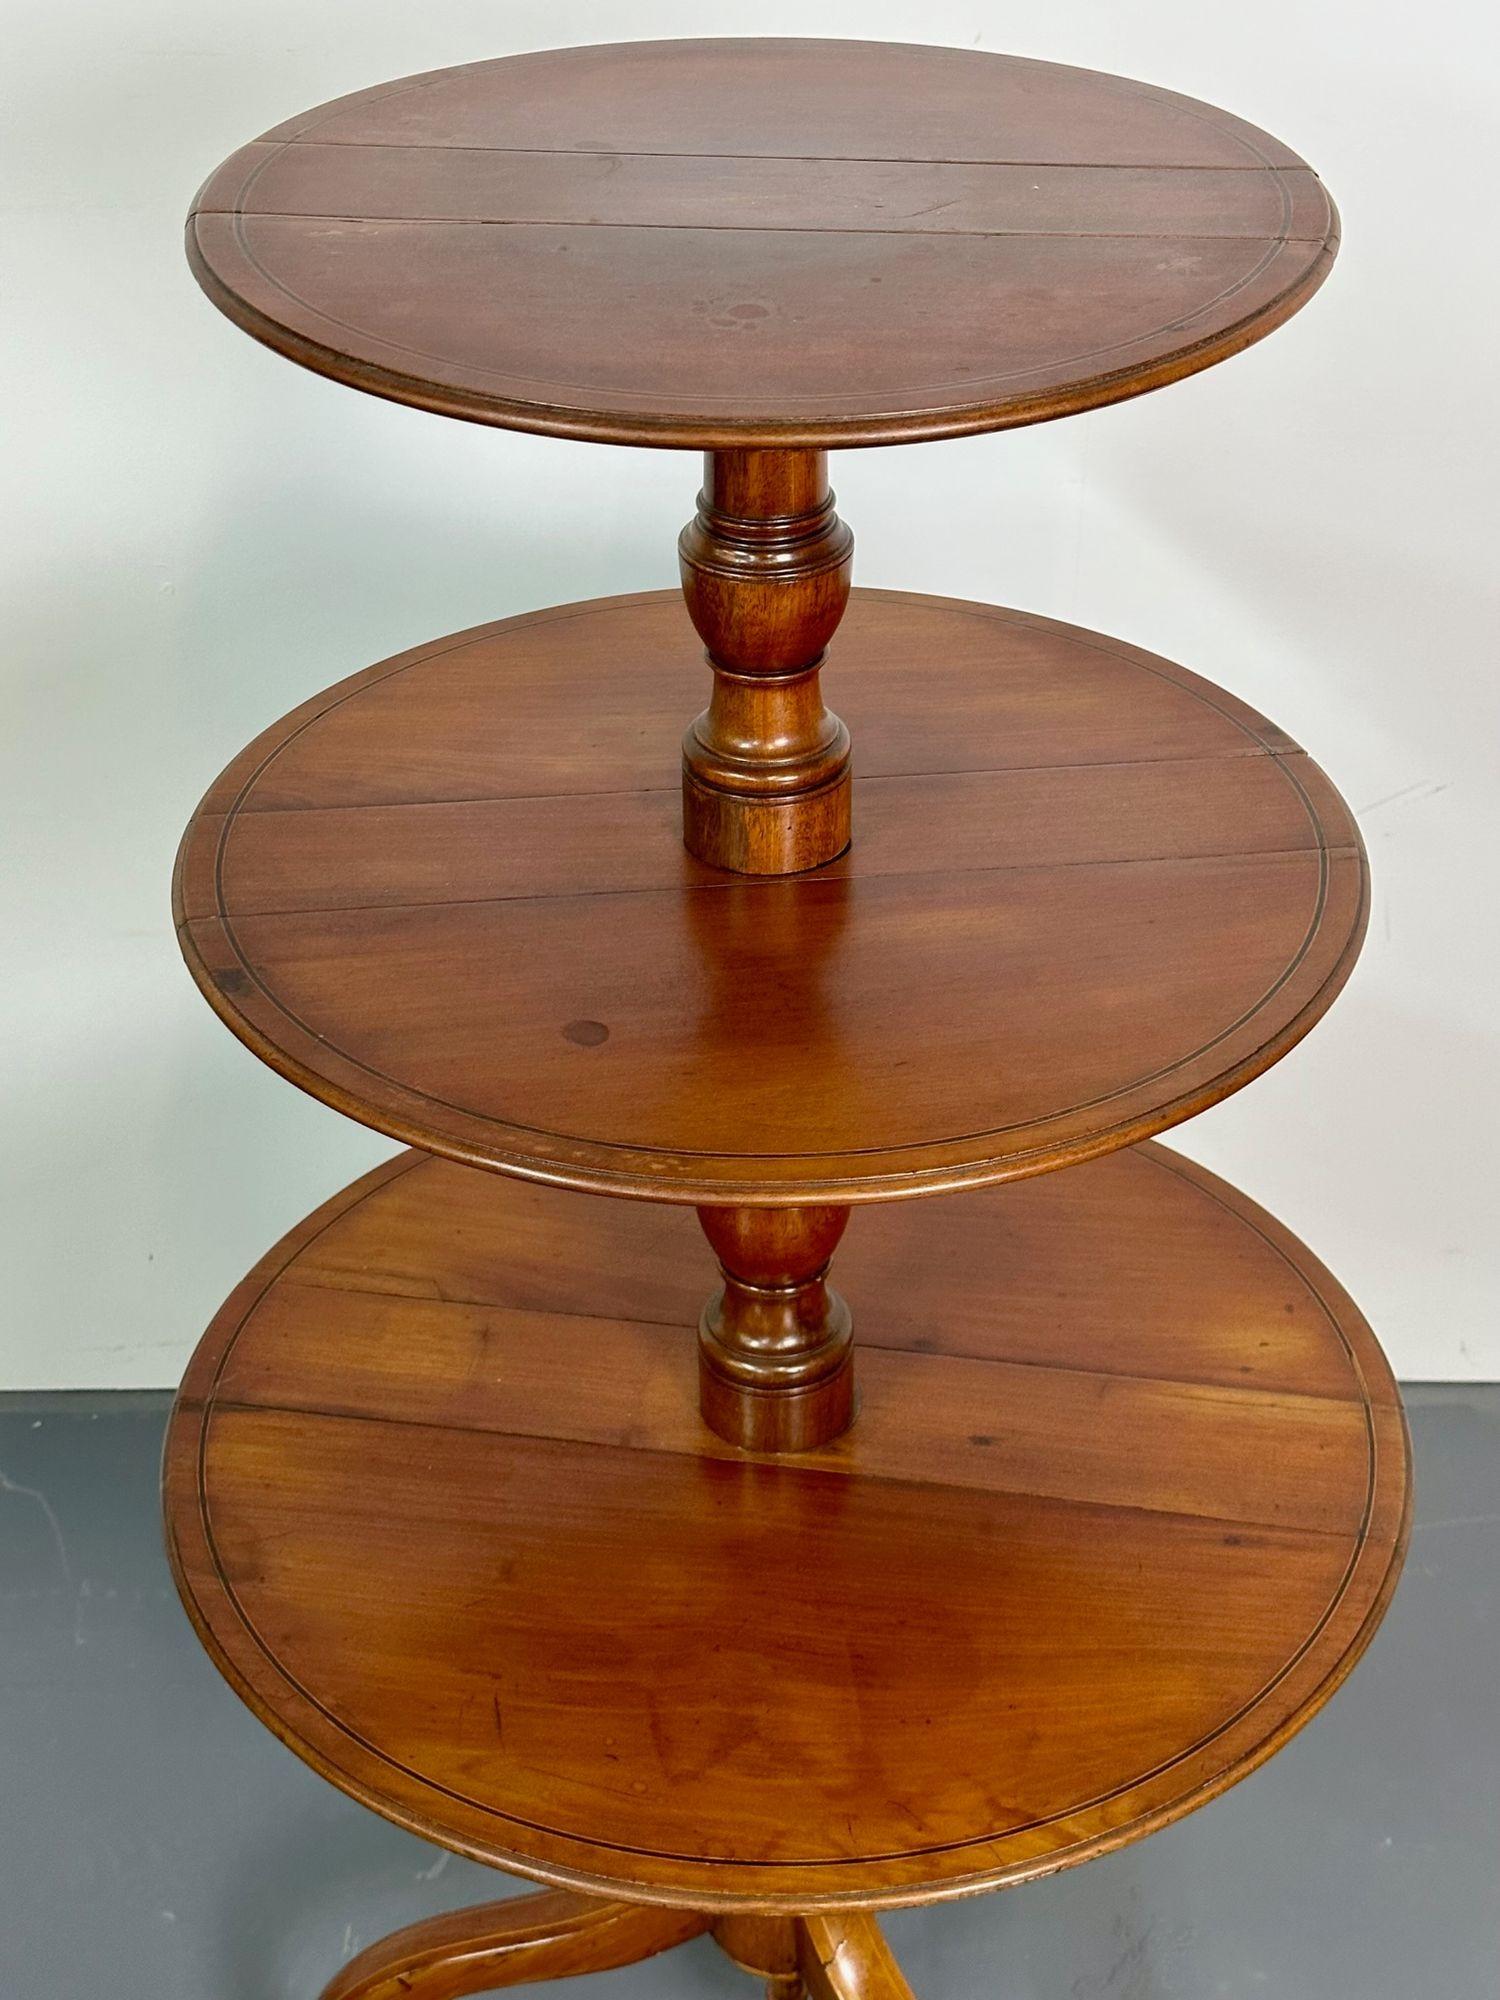 19th Century Mahogany Inlaid Three-Tier Dumbwaiter / Dessert Stand In Good Condition For Sale In Stamford, CT